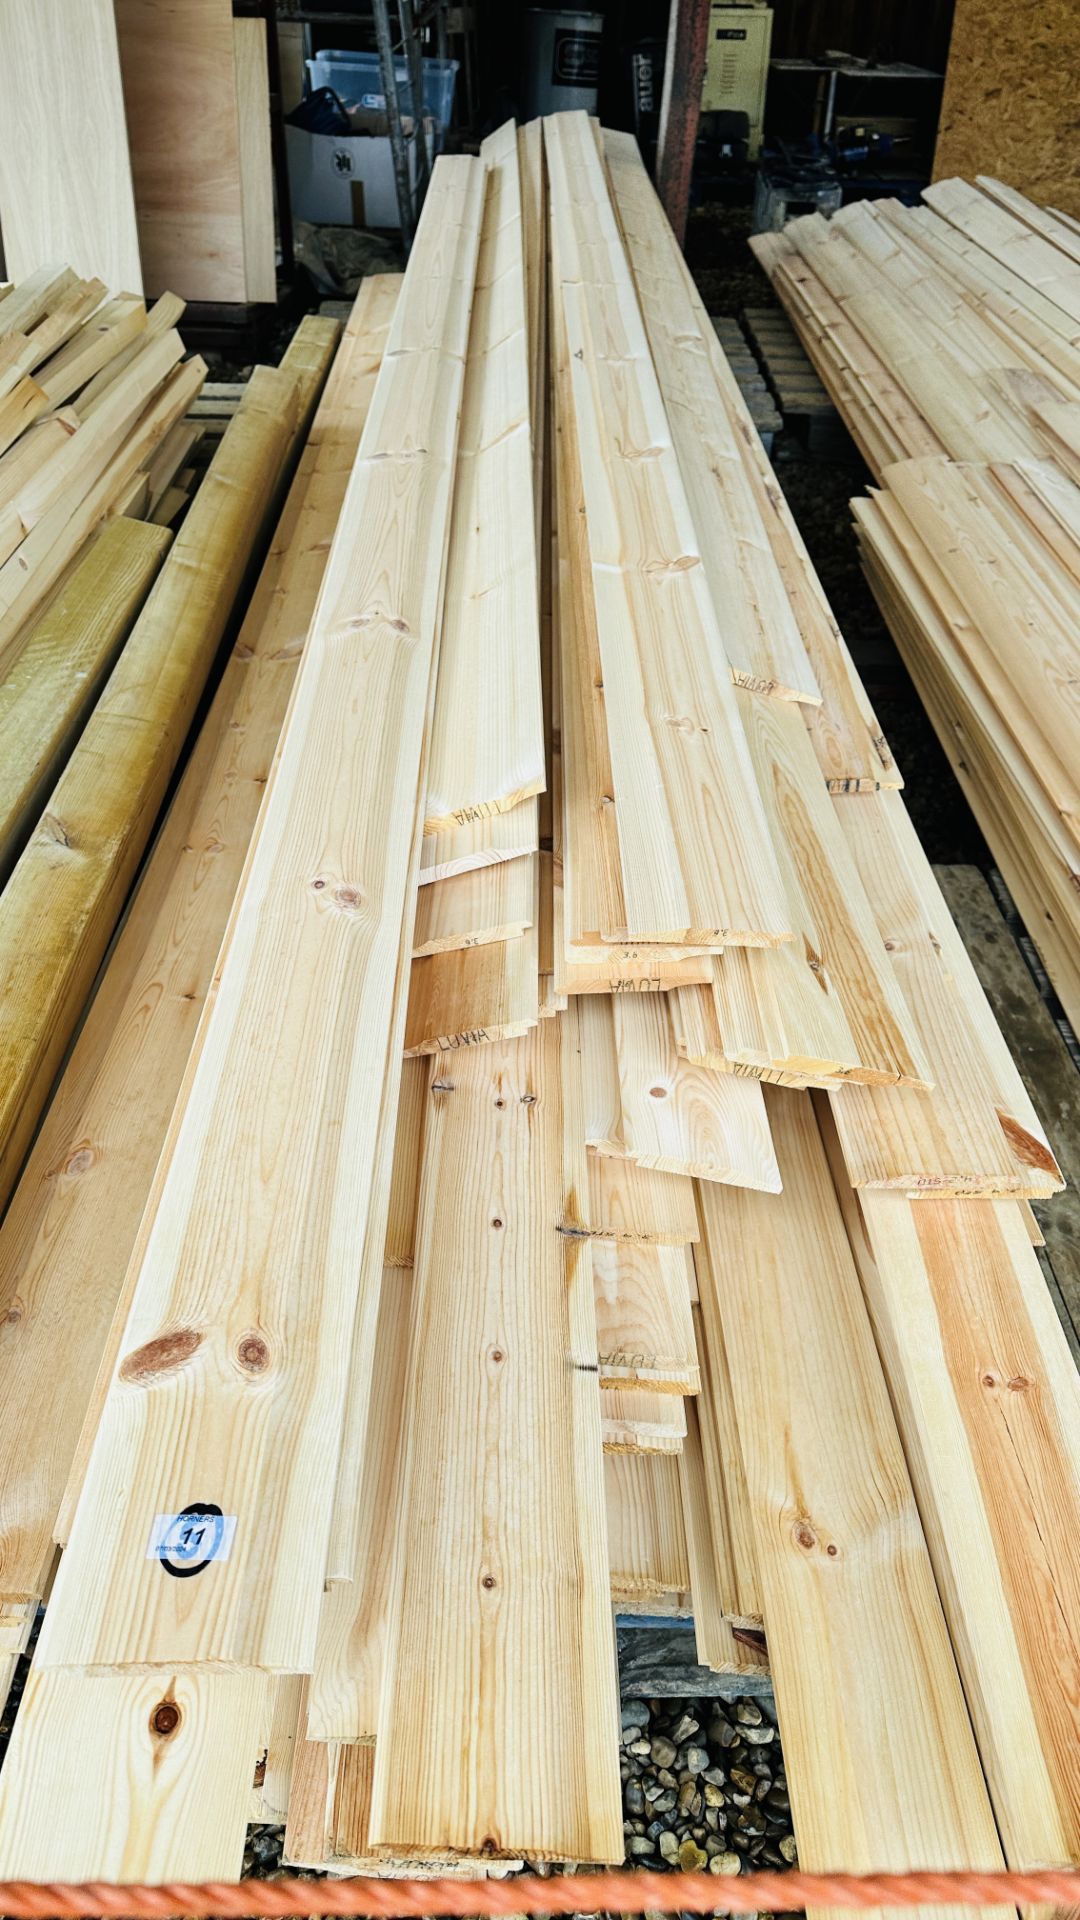 A LARGE QUANTITY 120MM TONGUE AND GROOVE CLADDING APPROX 500 METRES.